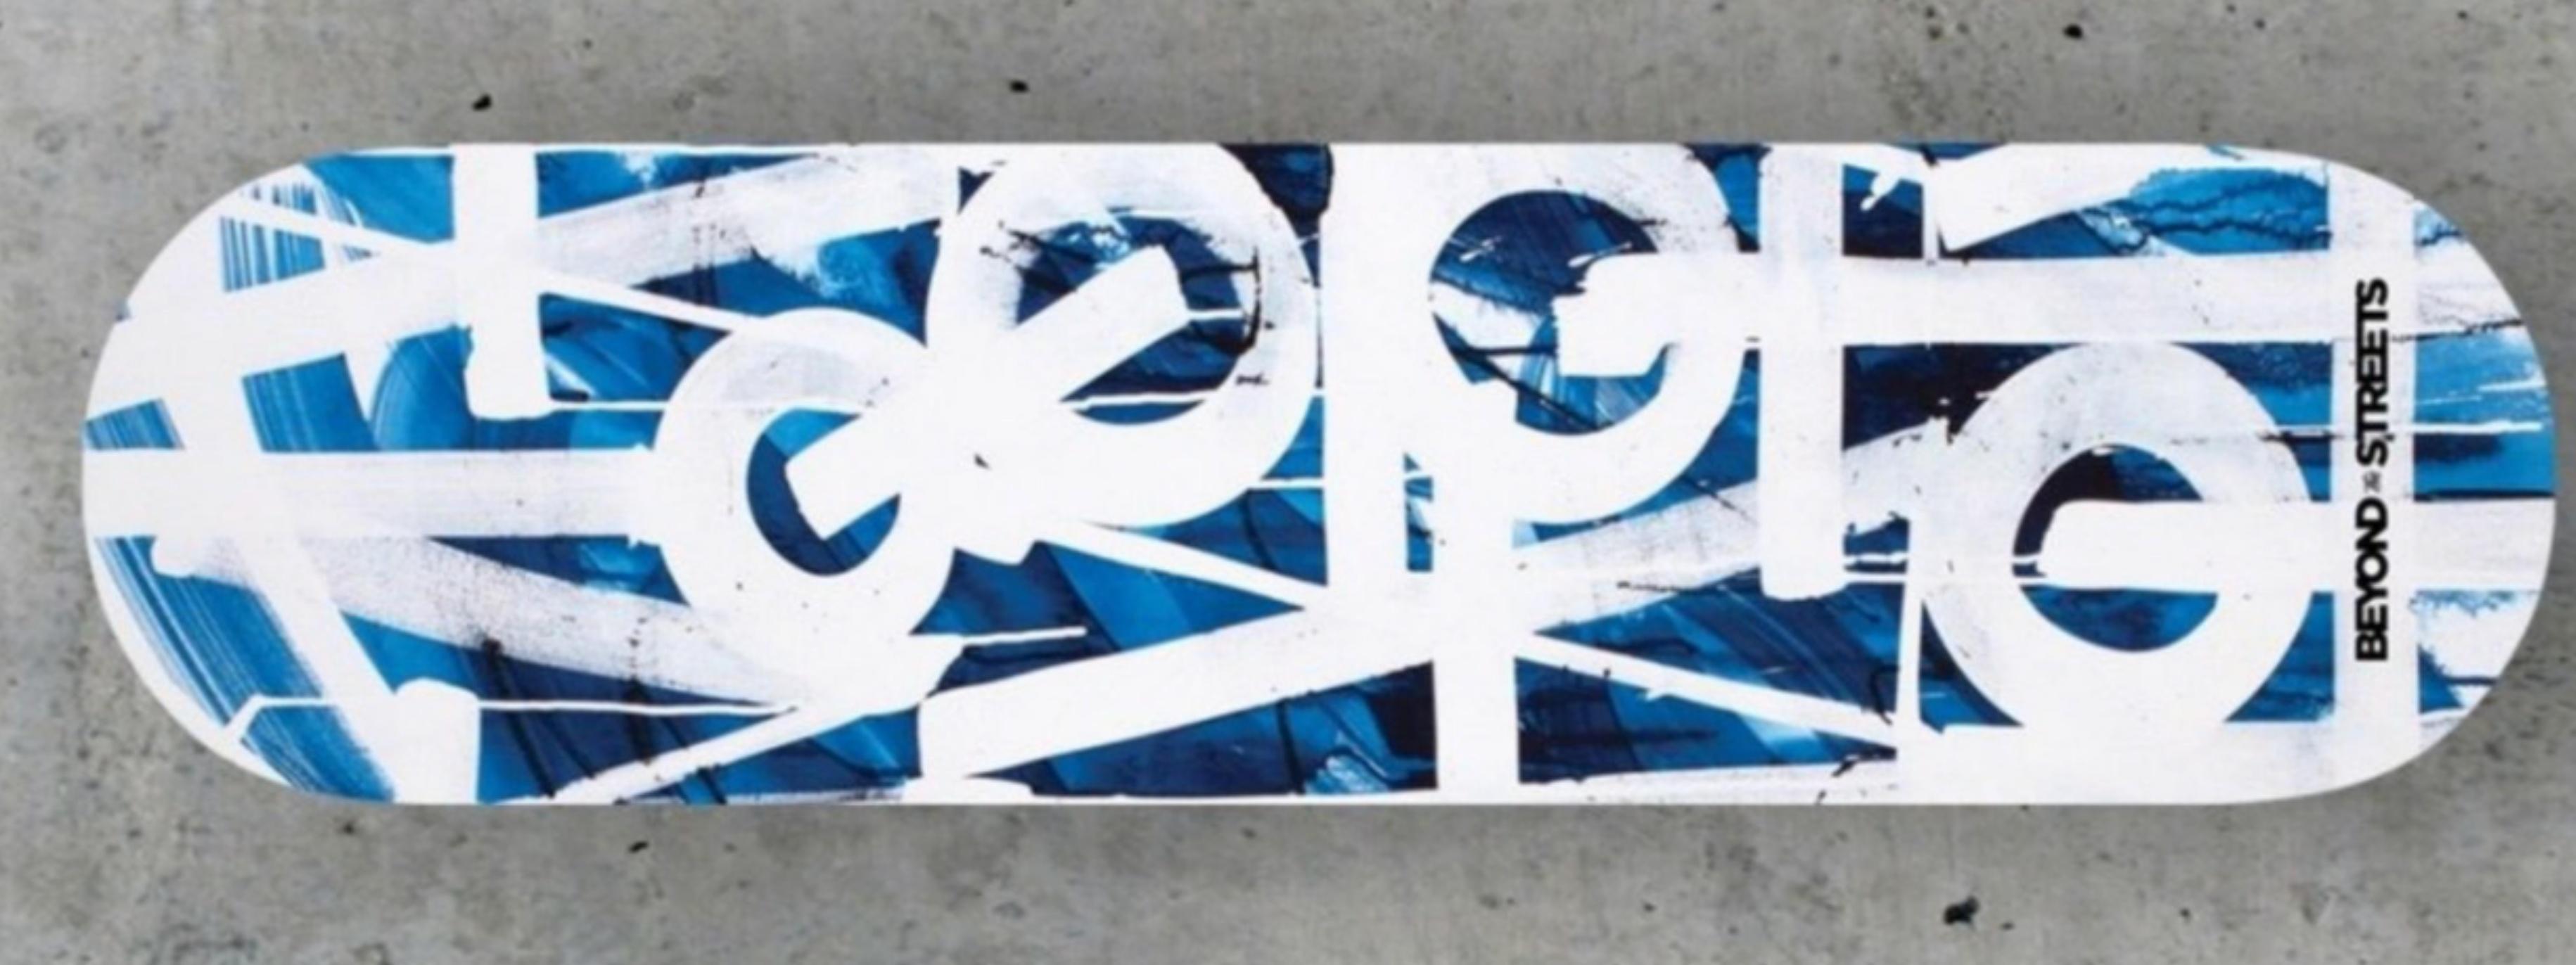 RETNA
Skateboard Skate deck (Blue with wood back) with COA hand signed by RETNA, 2018
Silkscreen on Maplewood skate deck. Accompanied by Hand signed Certificate of Authenticity on Embossed Letterhead.
Limited Edition of 100 
Separate embossed